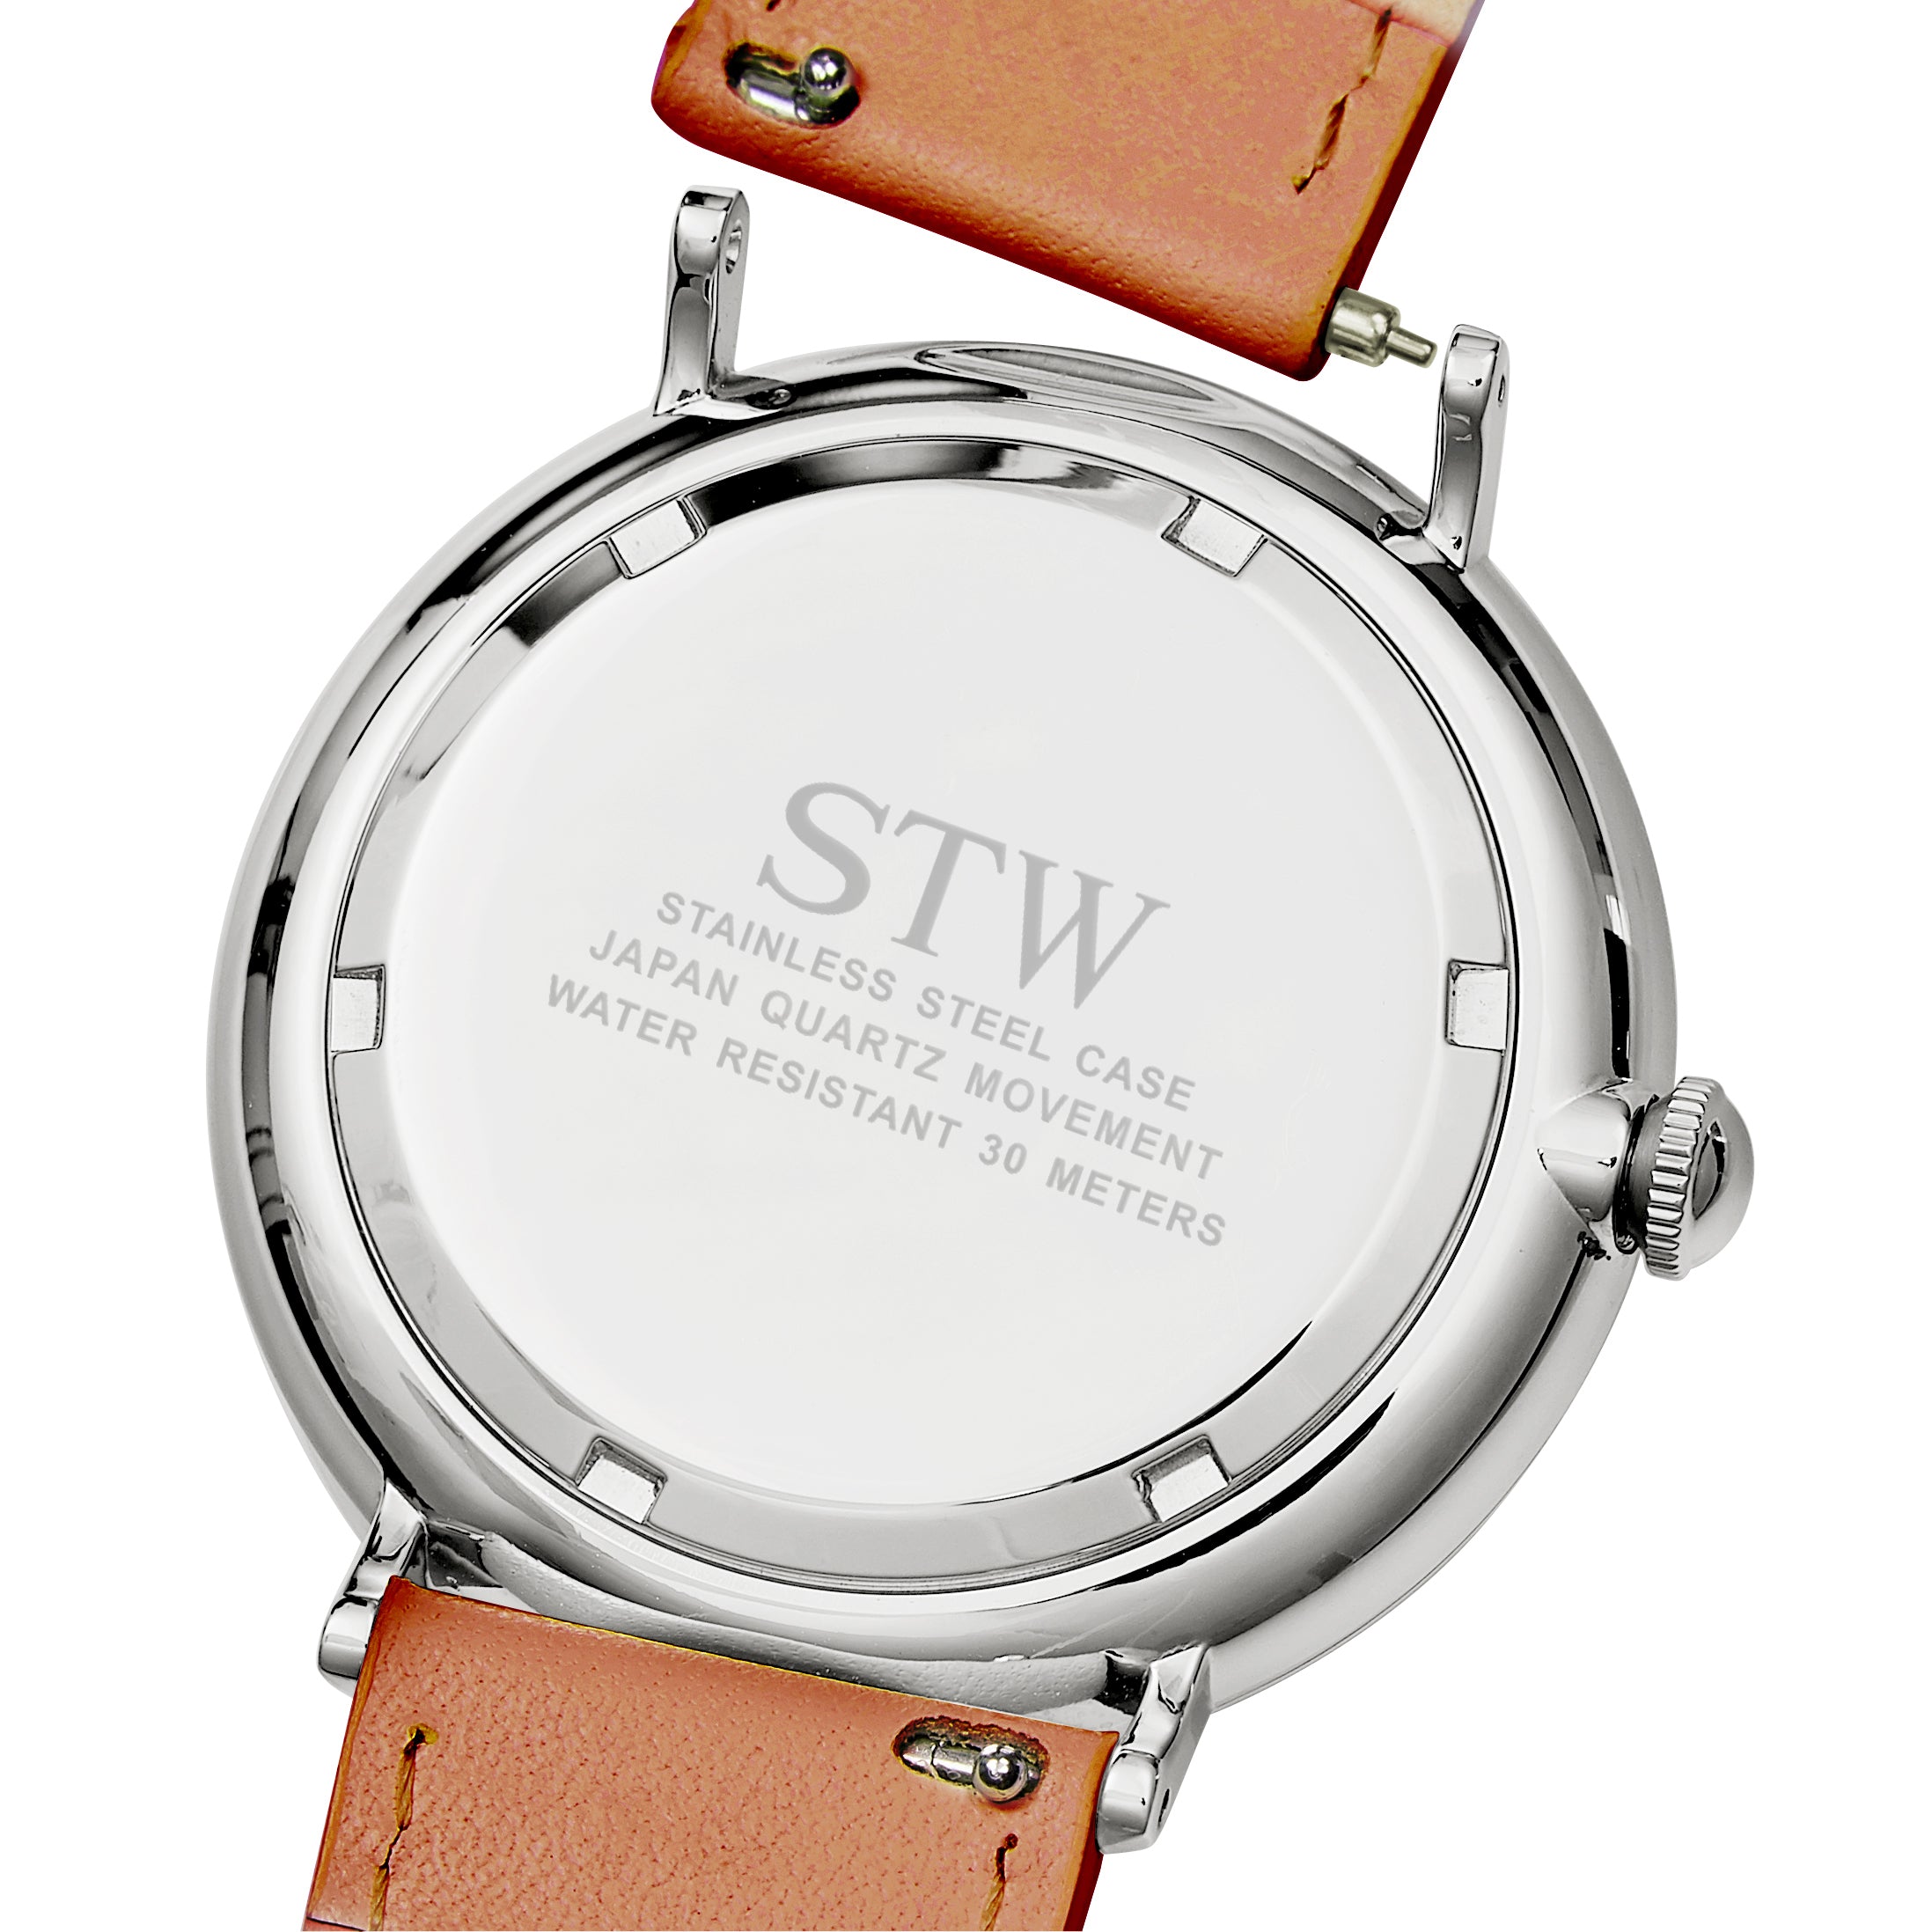 THE HERITAGE -  WHITE DIAL / RED BROWN LEATHER STRAP WATCH